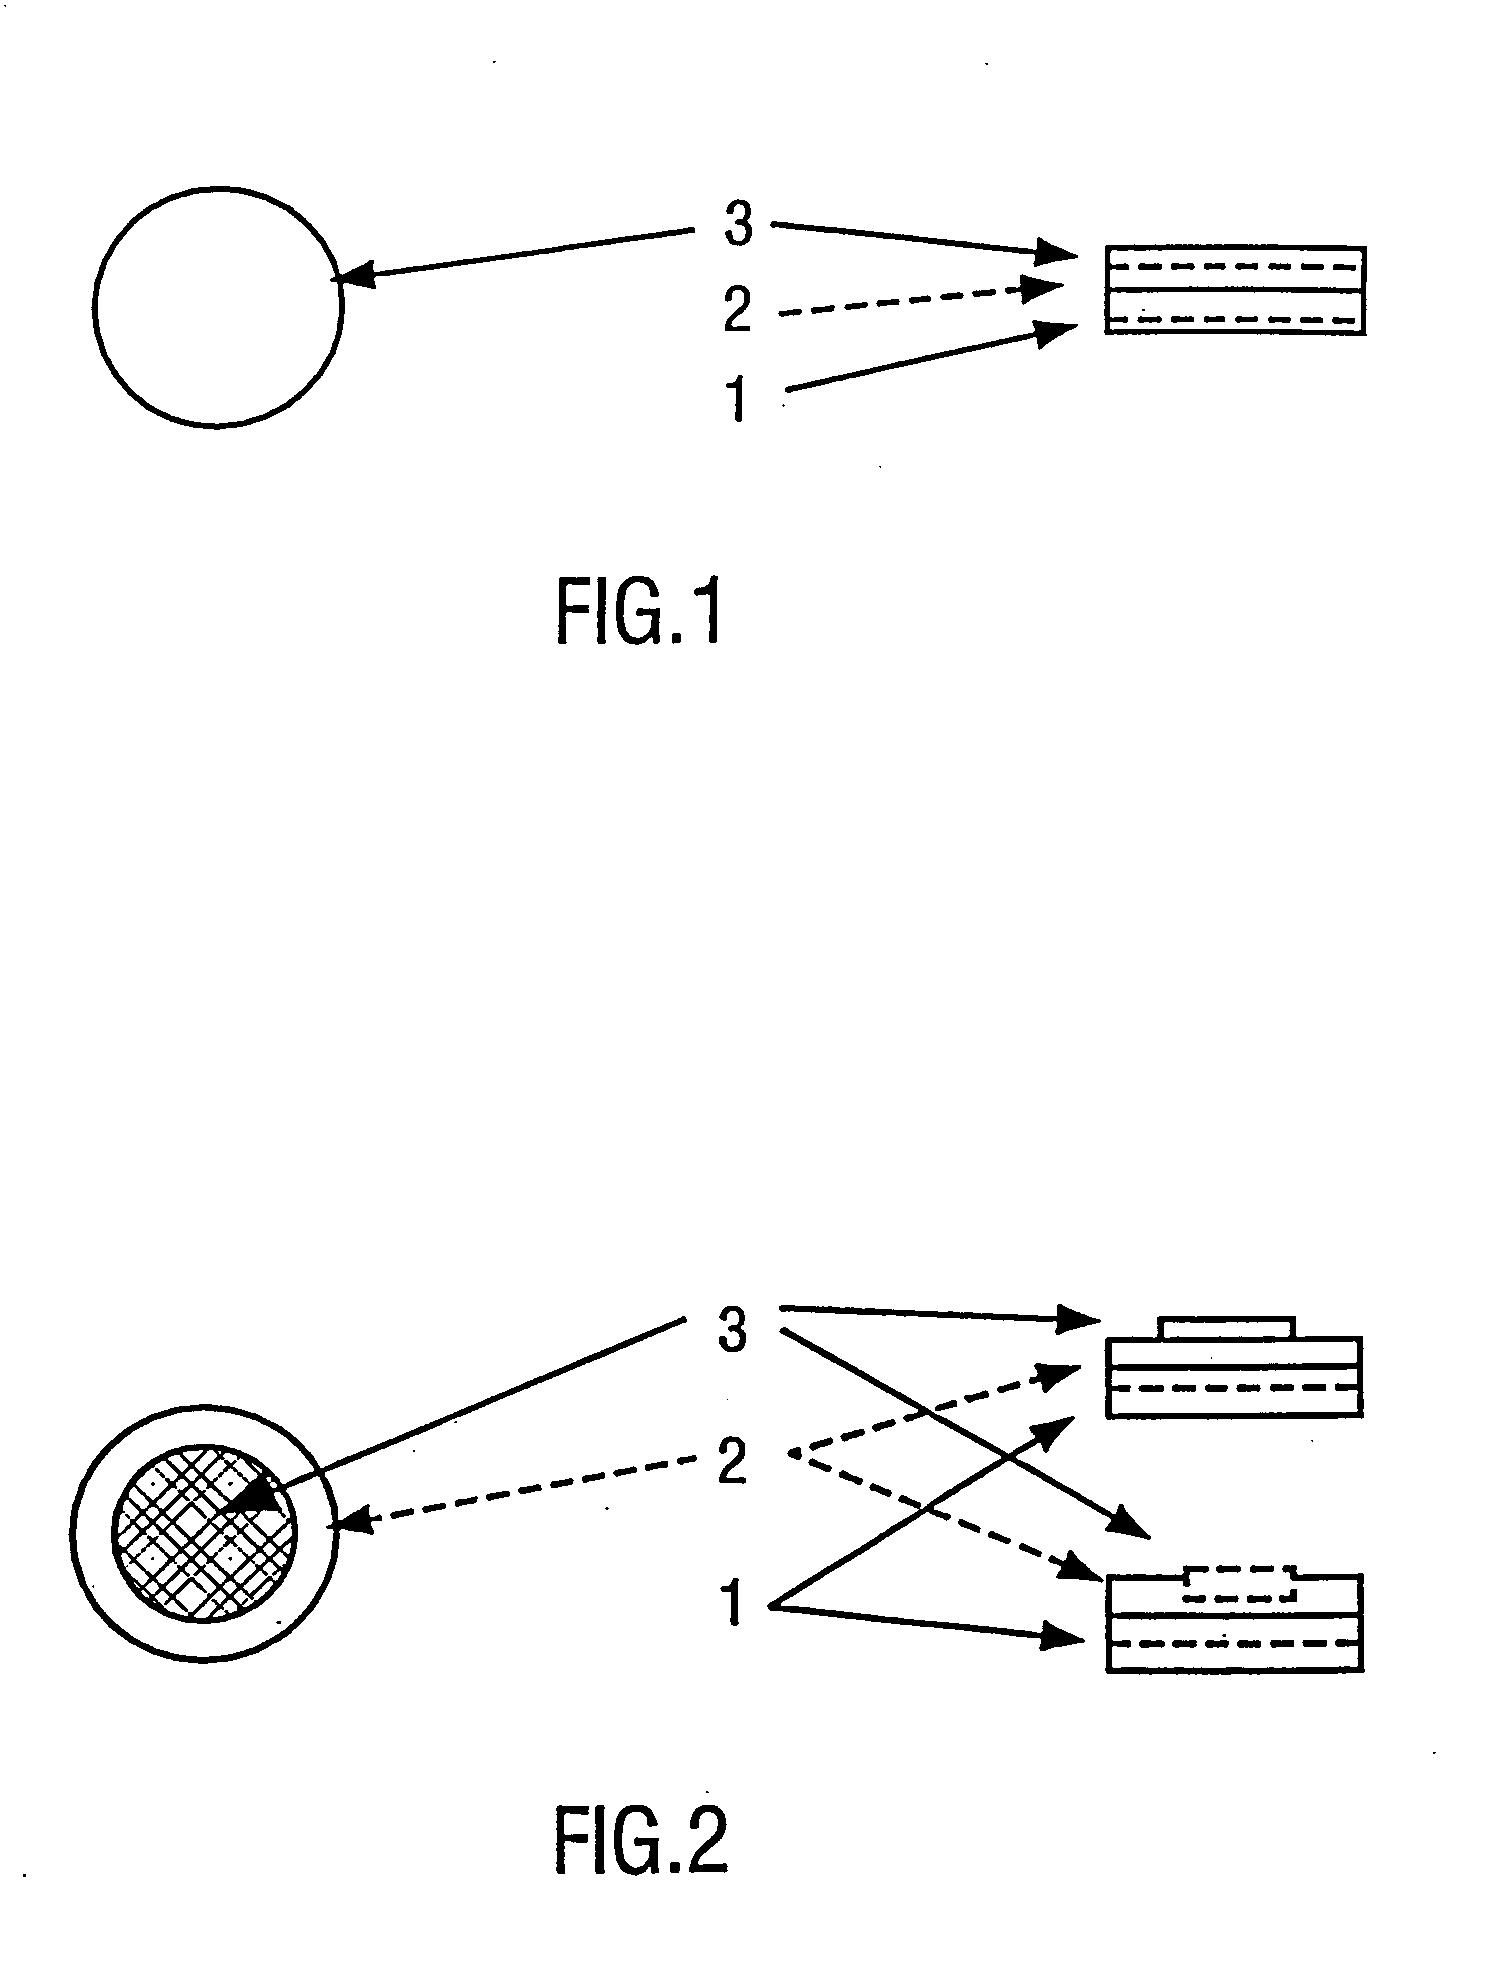 Pharmaceutical carrier device suitable for delivery of pharmaceutical compounds to mucosal surfaces